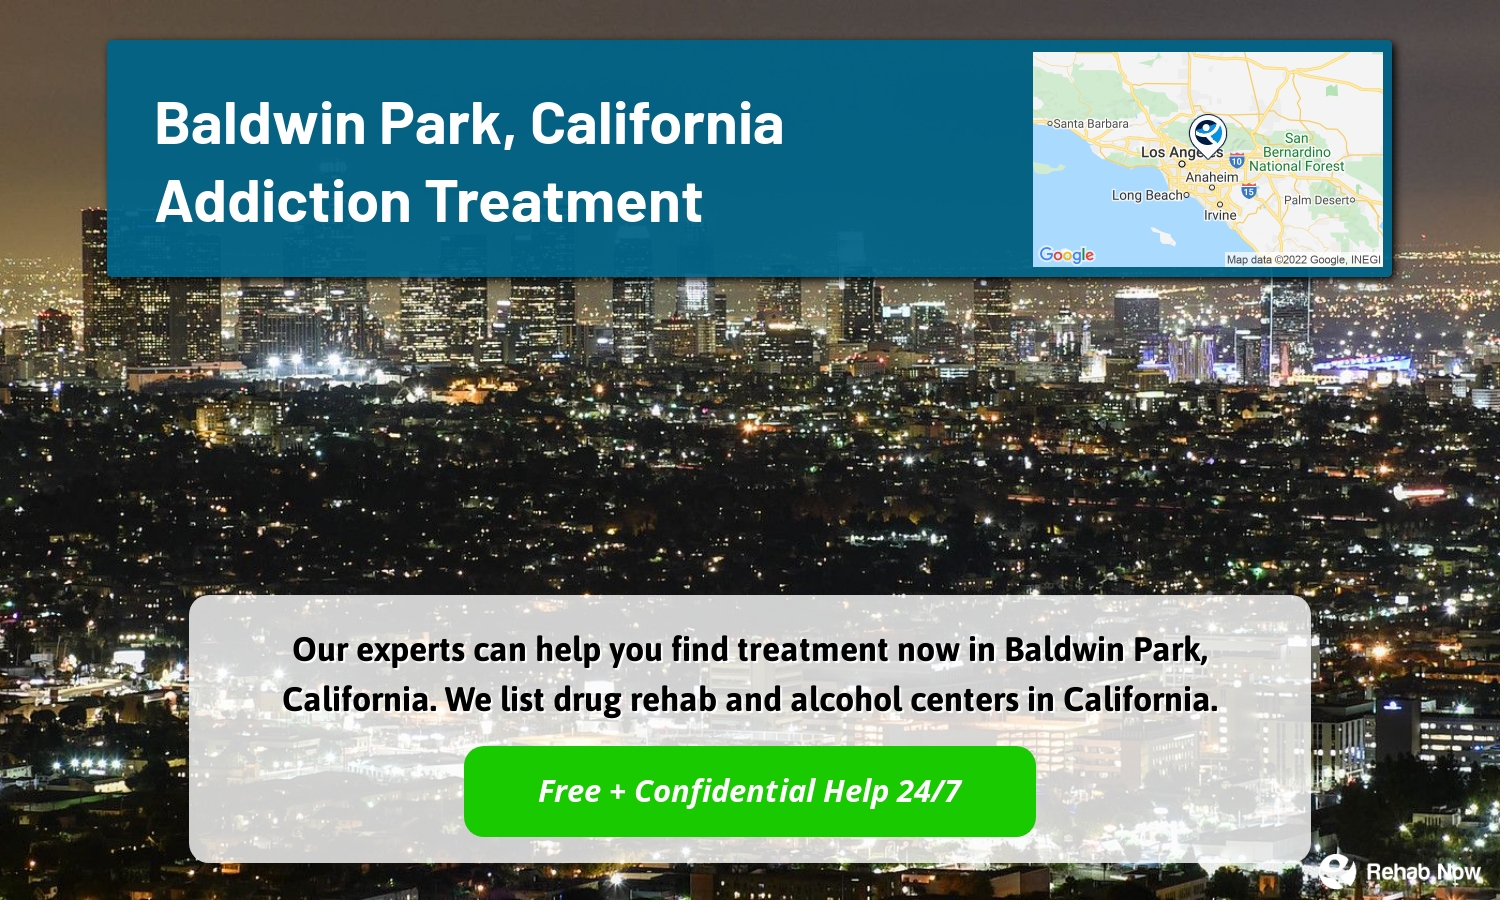 Our experts can help you find treatment now in Baldwin Park, California. We list drug rehab and alcohol centers in California.